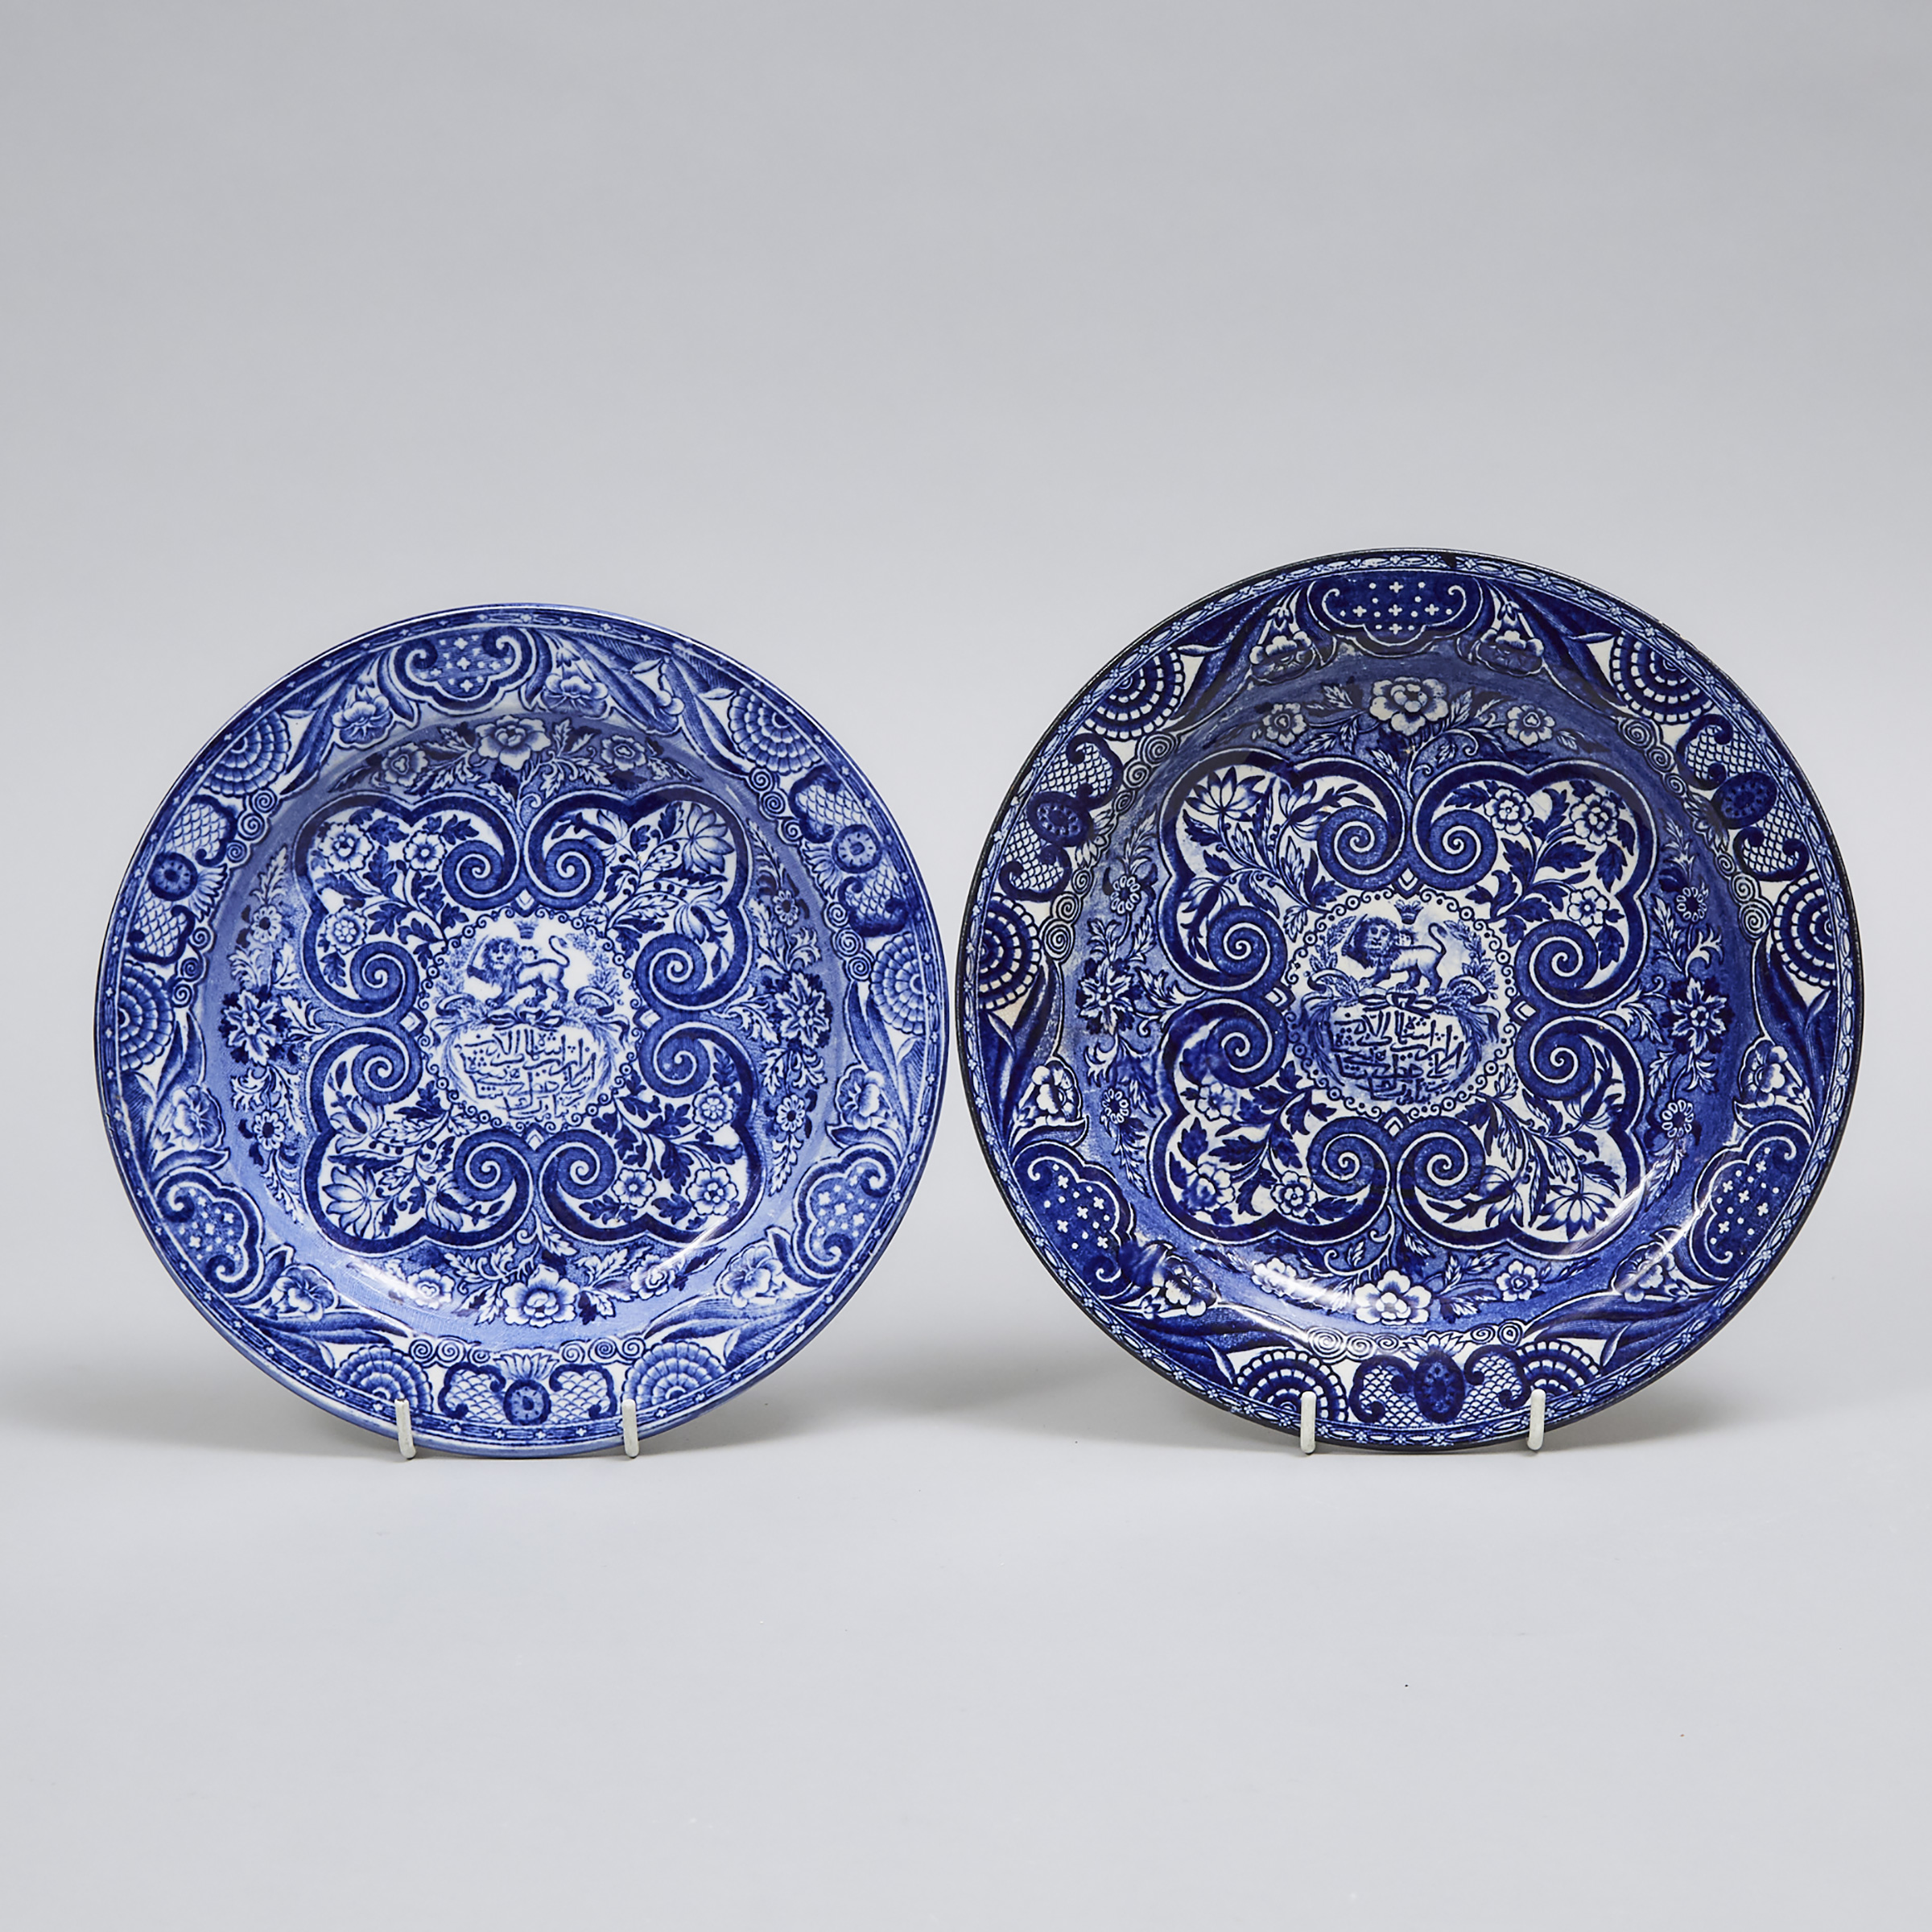 Two Staffordshire Pottery Blue and White Transferware 'Alahambra' Pattern Plates for the Persian Market, British Anchor Pottery, c.1864